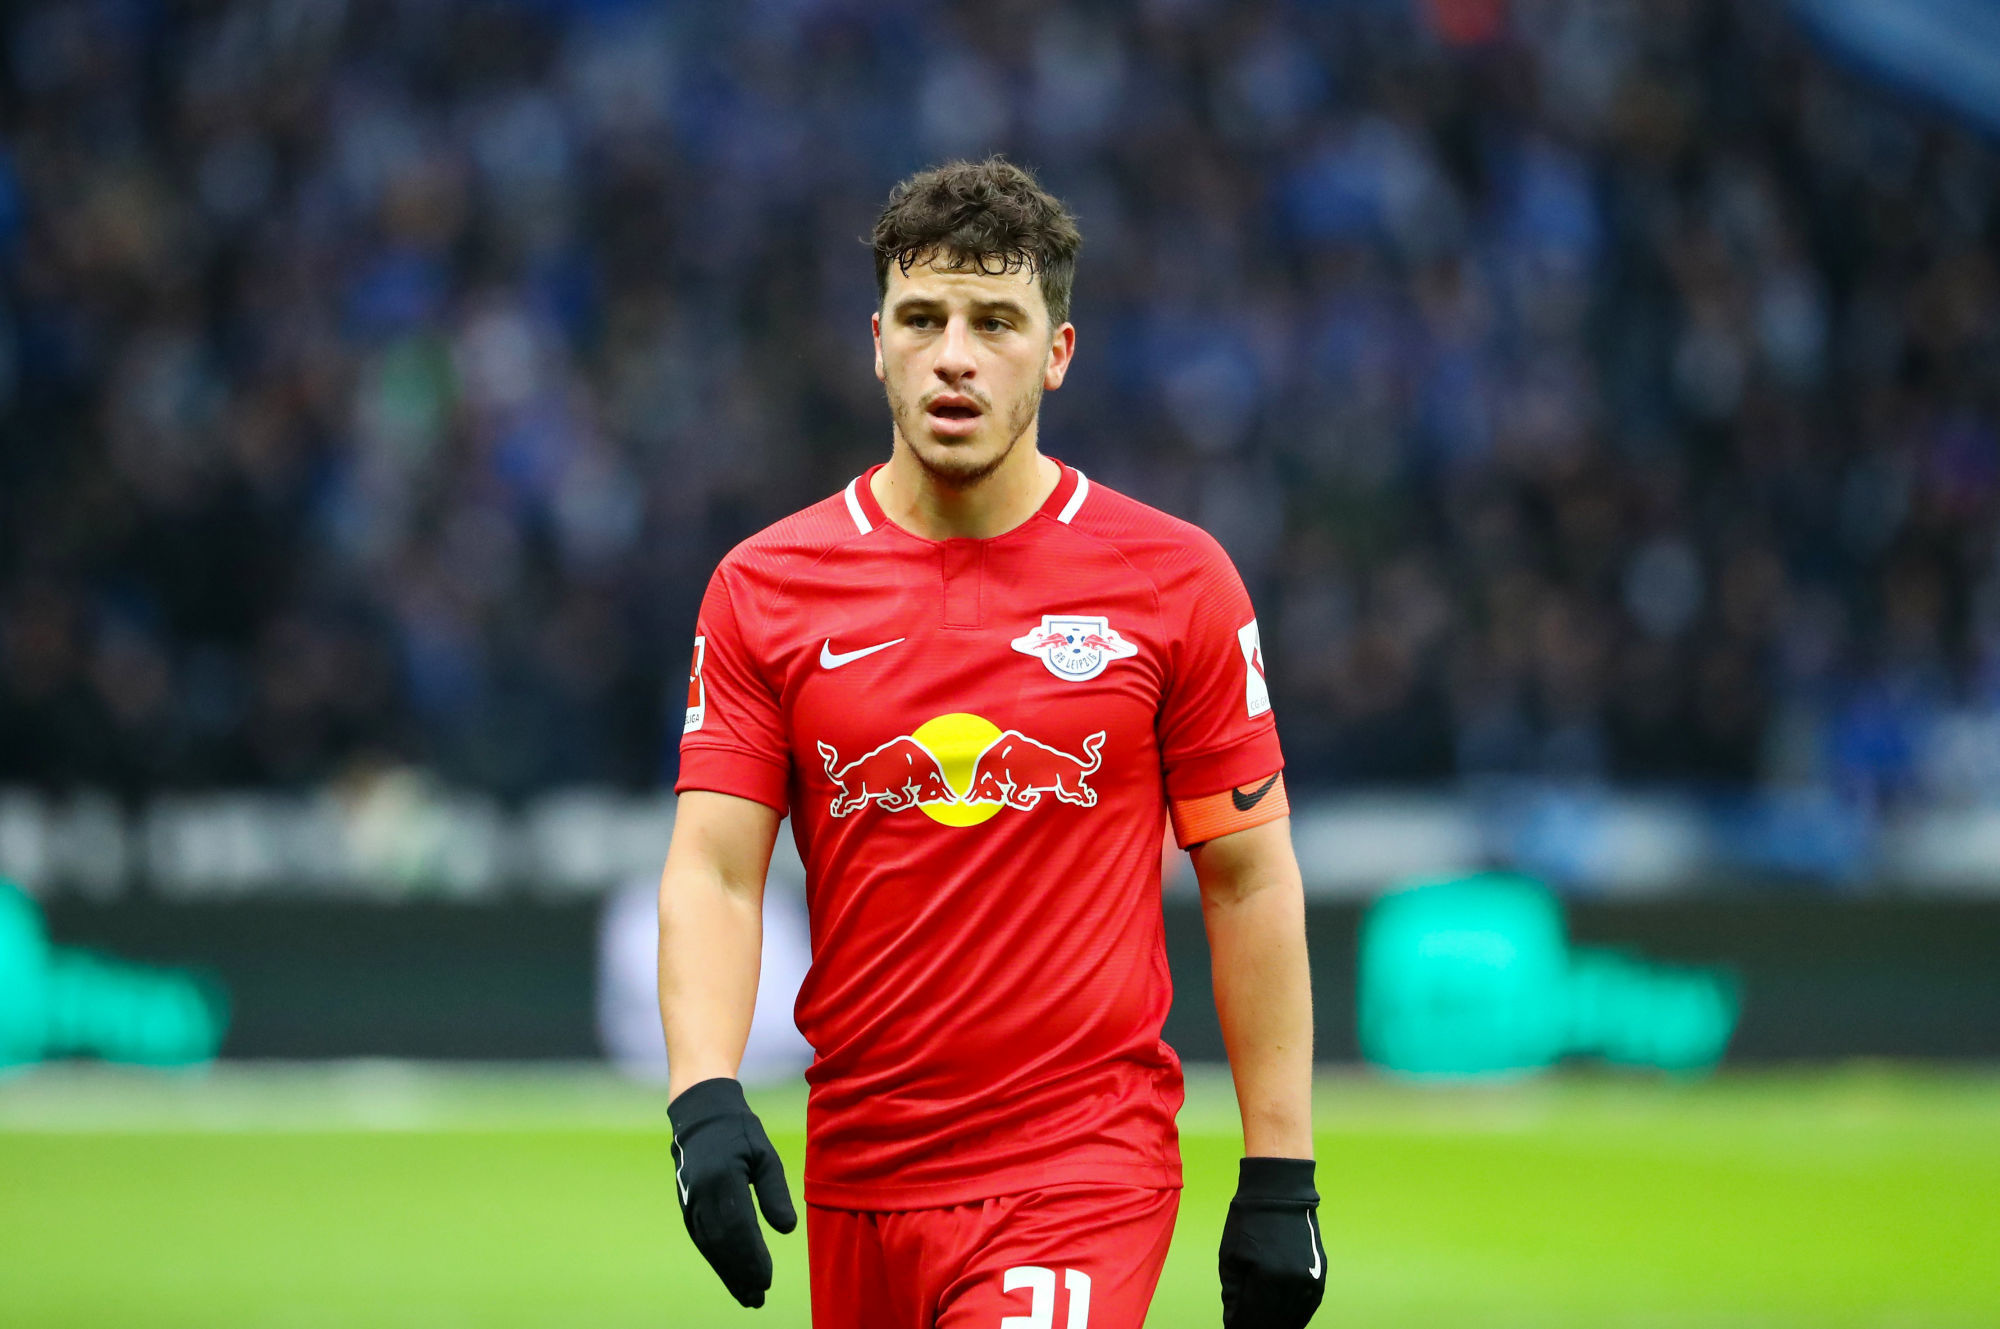 BERLIN,GERMANY,09.NOV.19 - SOCCER - 1. DFL, 1. Deutsche Bundesliga, Hertha BSC Berlin vs RasenBallsport Leipzig. Image shows Diego Demme (RB Leipzig).  Photo: GEPA pictures/ Roger Petzsche - DFL regulations prohibit any use of photographs as image sequences and/or quasi-video 

Photo by Icon Sport - Diego DEMME - Stadion An der Alten Forsterei - Berlin (Allemagne)